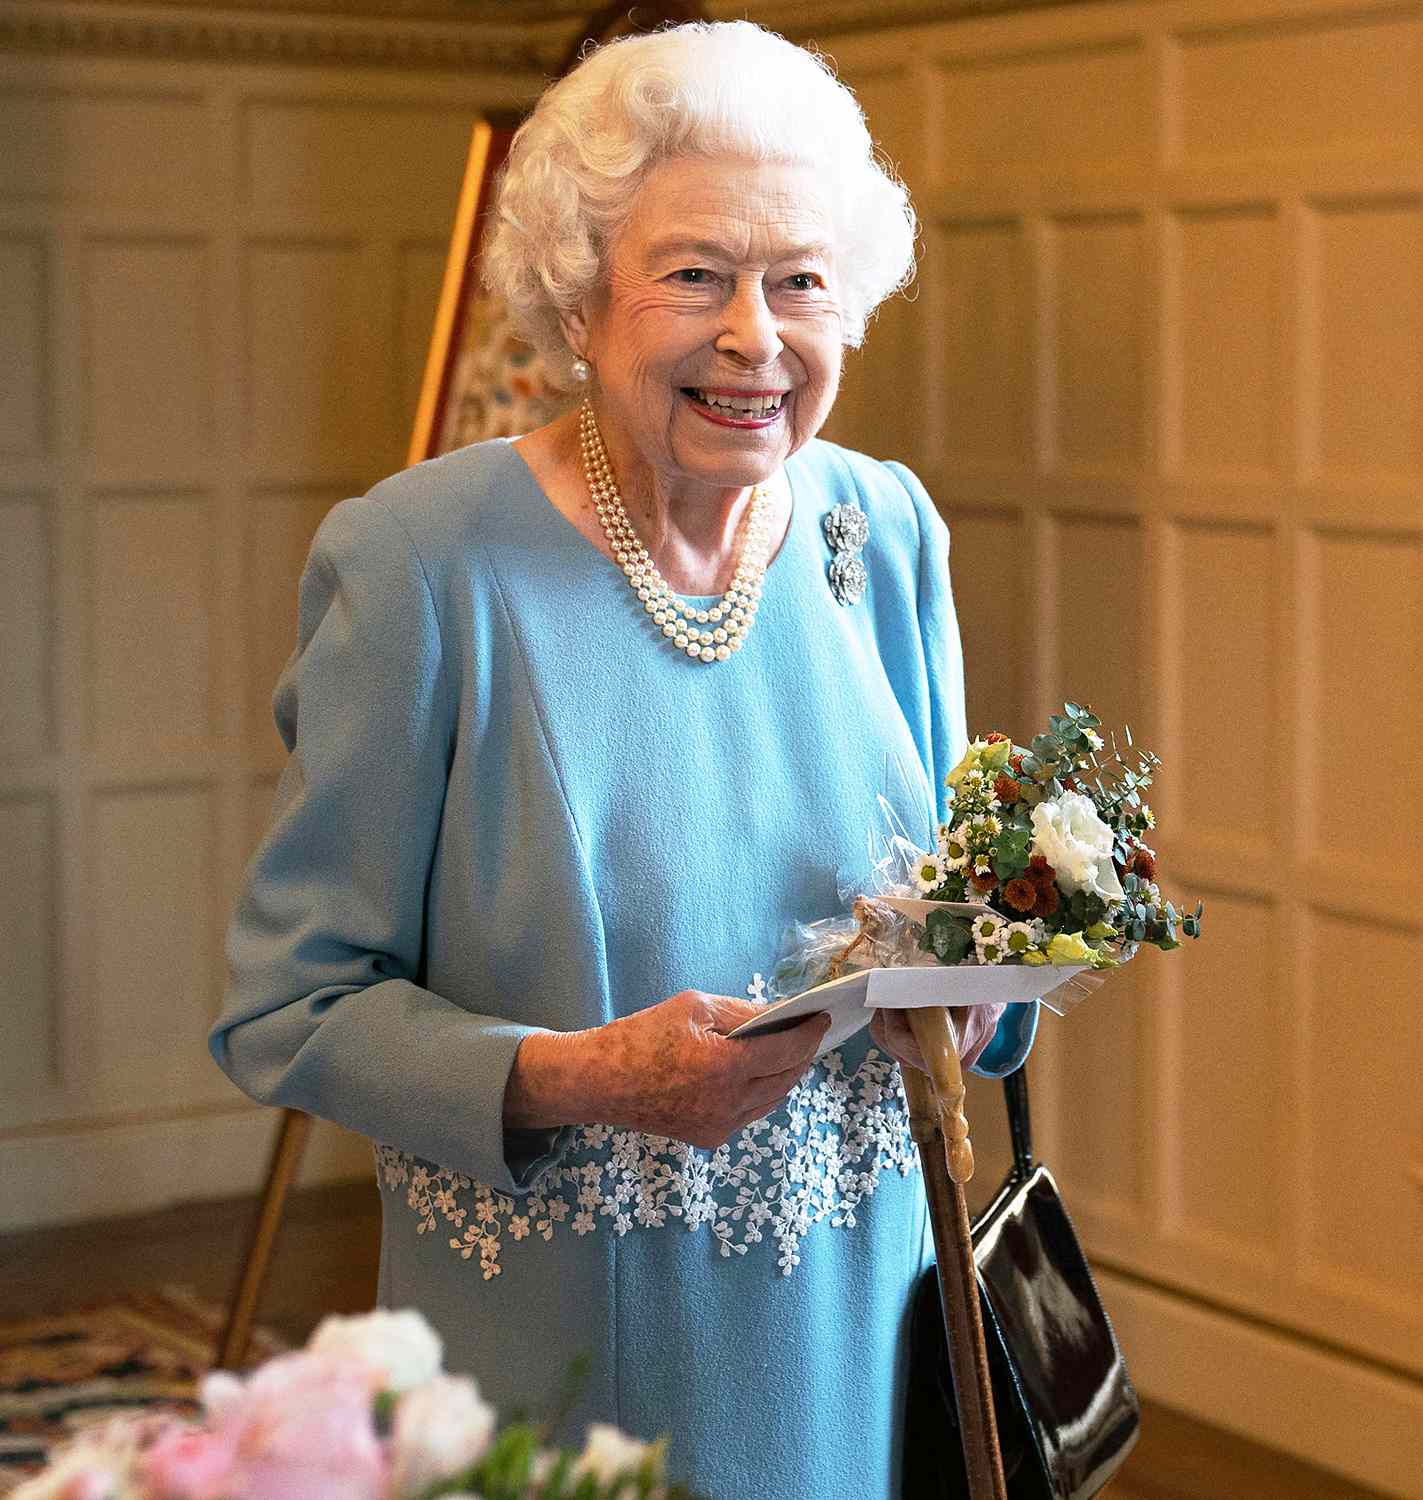 Britain's Queen Elizabeth II talks to members of the West Norfolk Befriending Society as she celebrates the start of the Platinum Jubilee at a reception in the Ballroom of Sandringham House, the Queen's Norfolk residence on February 5, 2022.